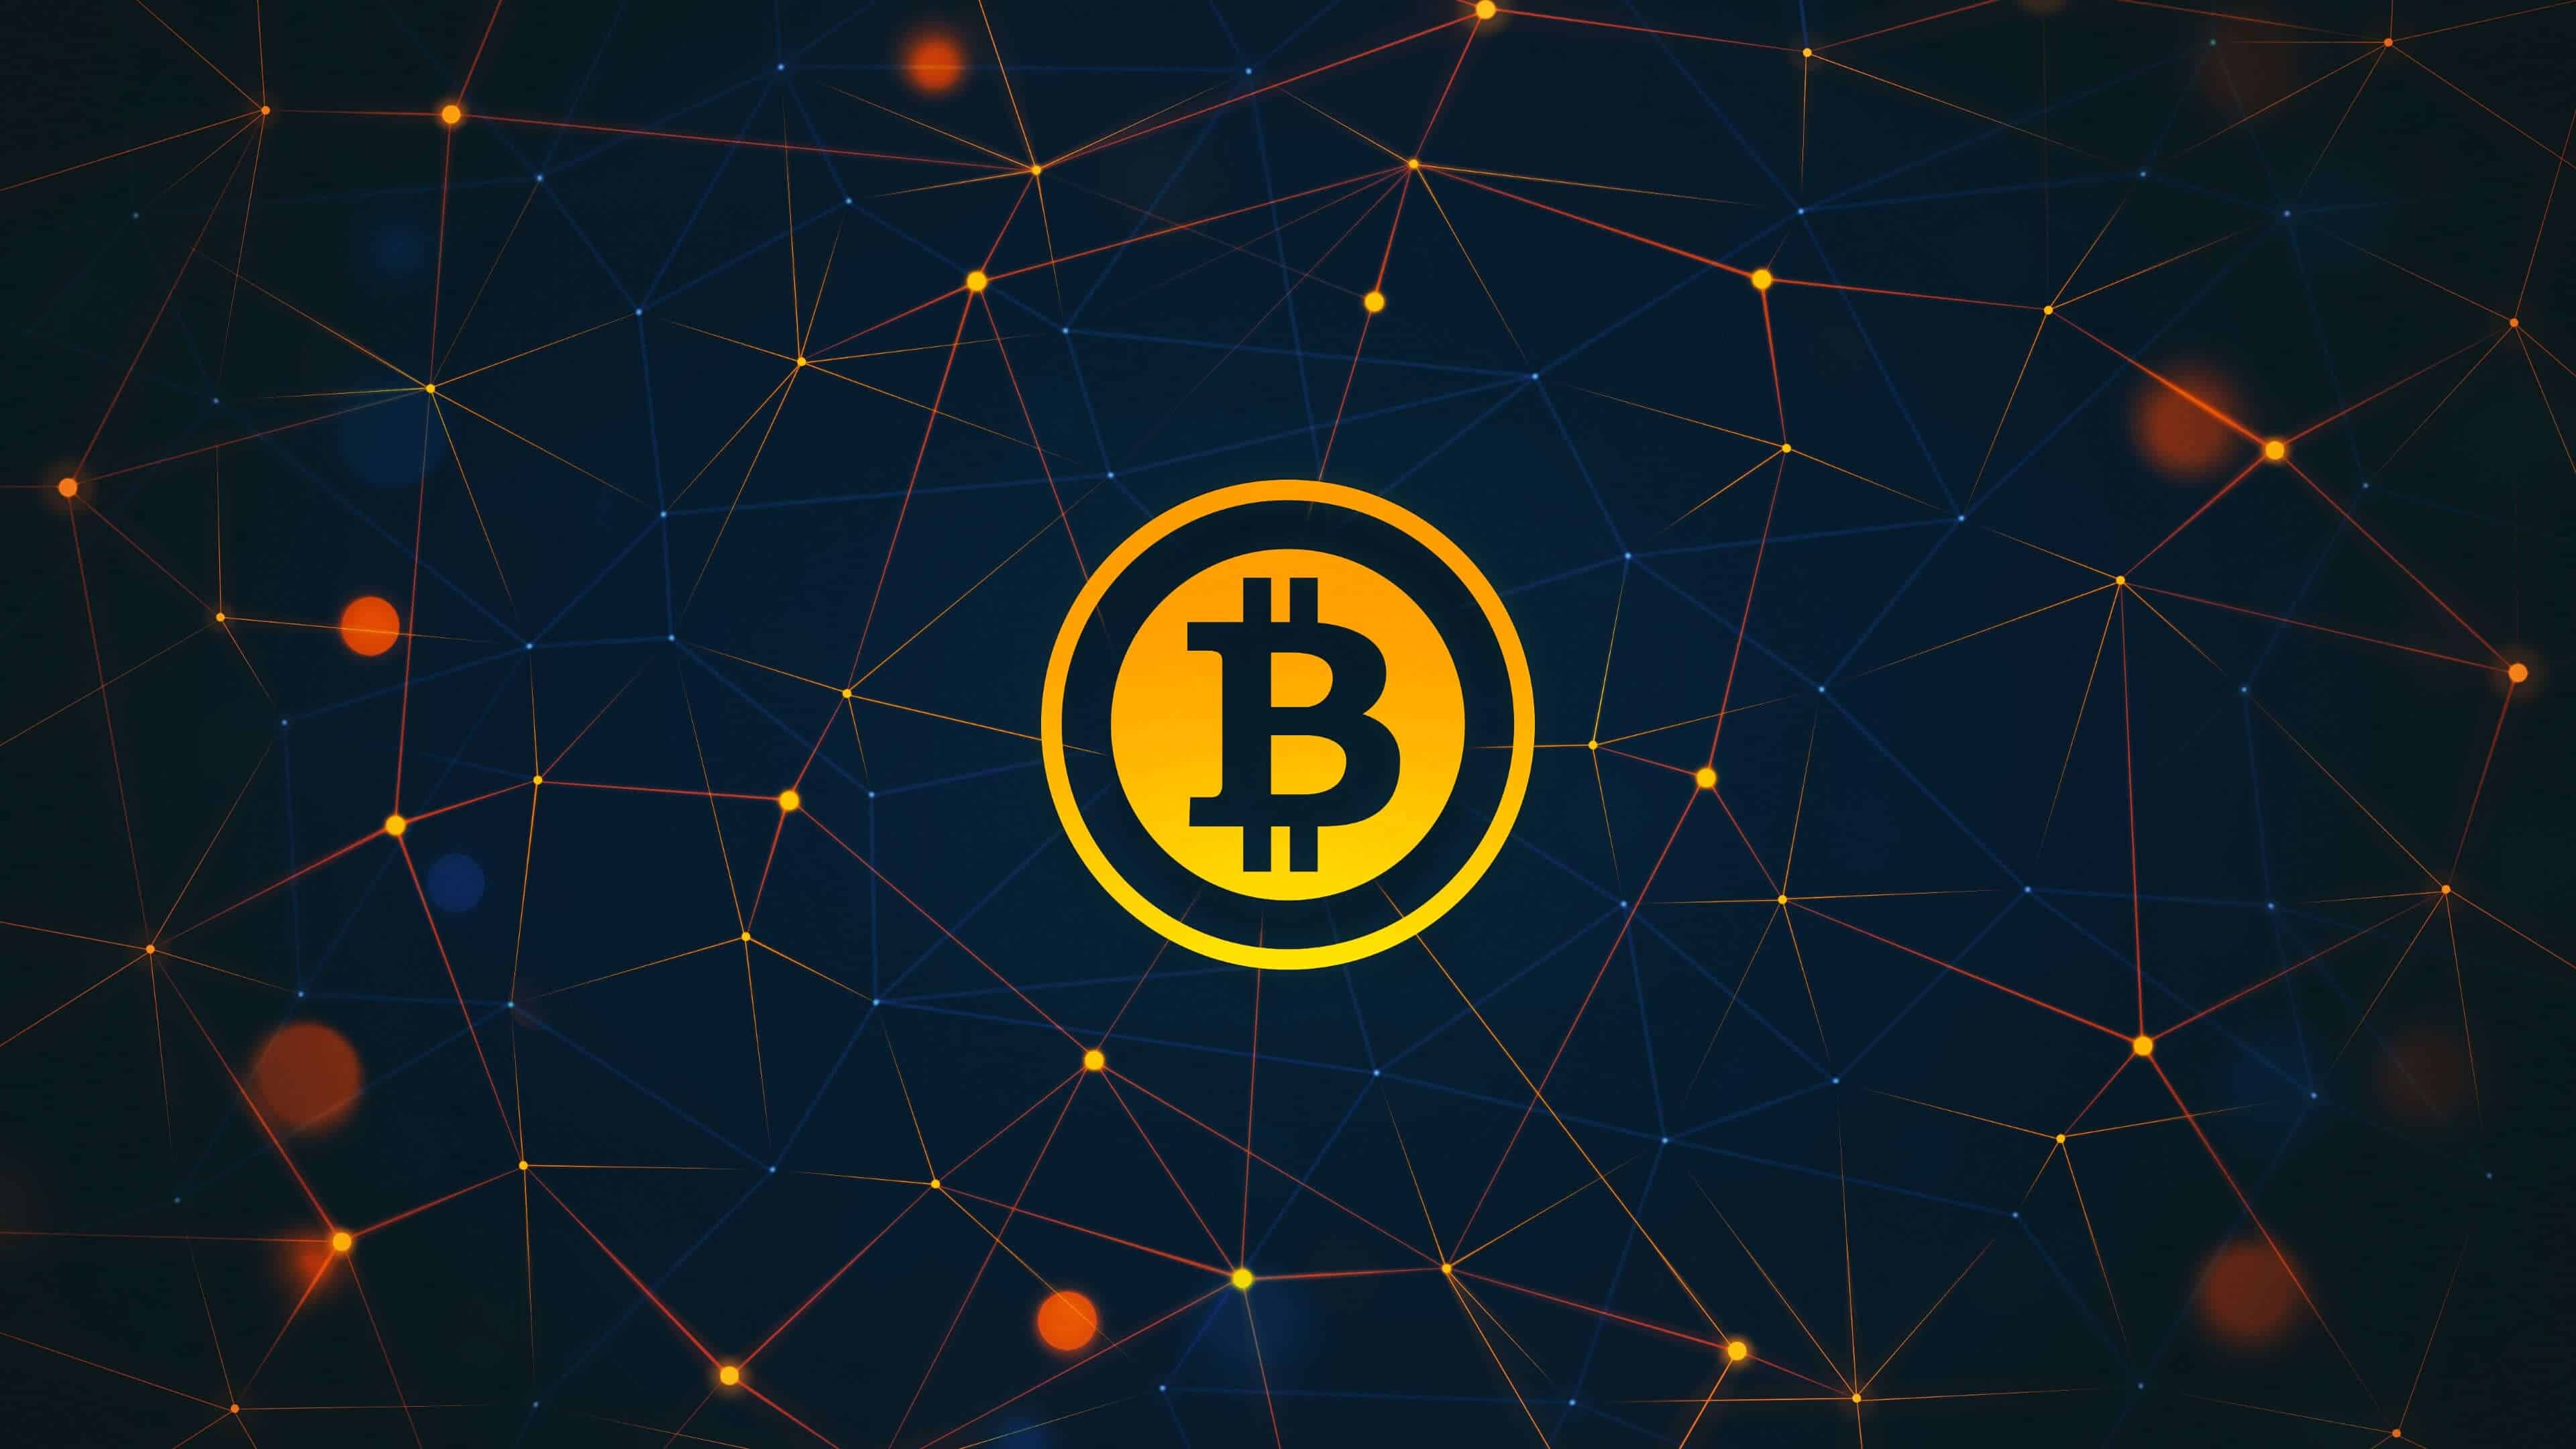 Cryptocurrency: Bitcoin, The first and most widely recognized crypto. 3840x2160 4K Background.